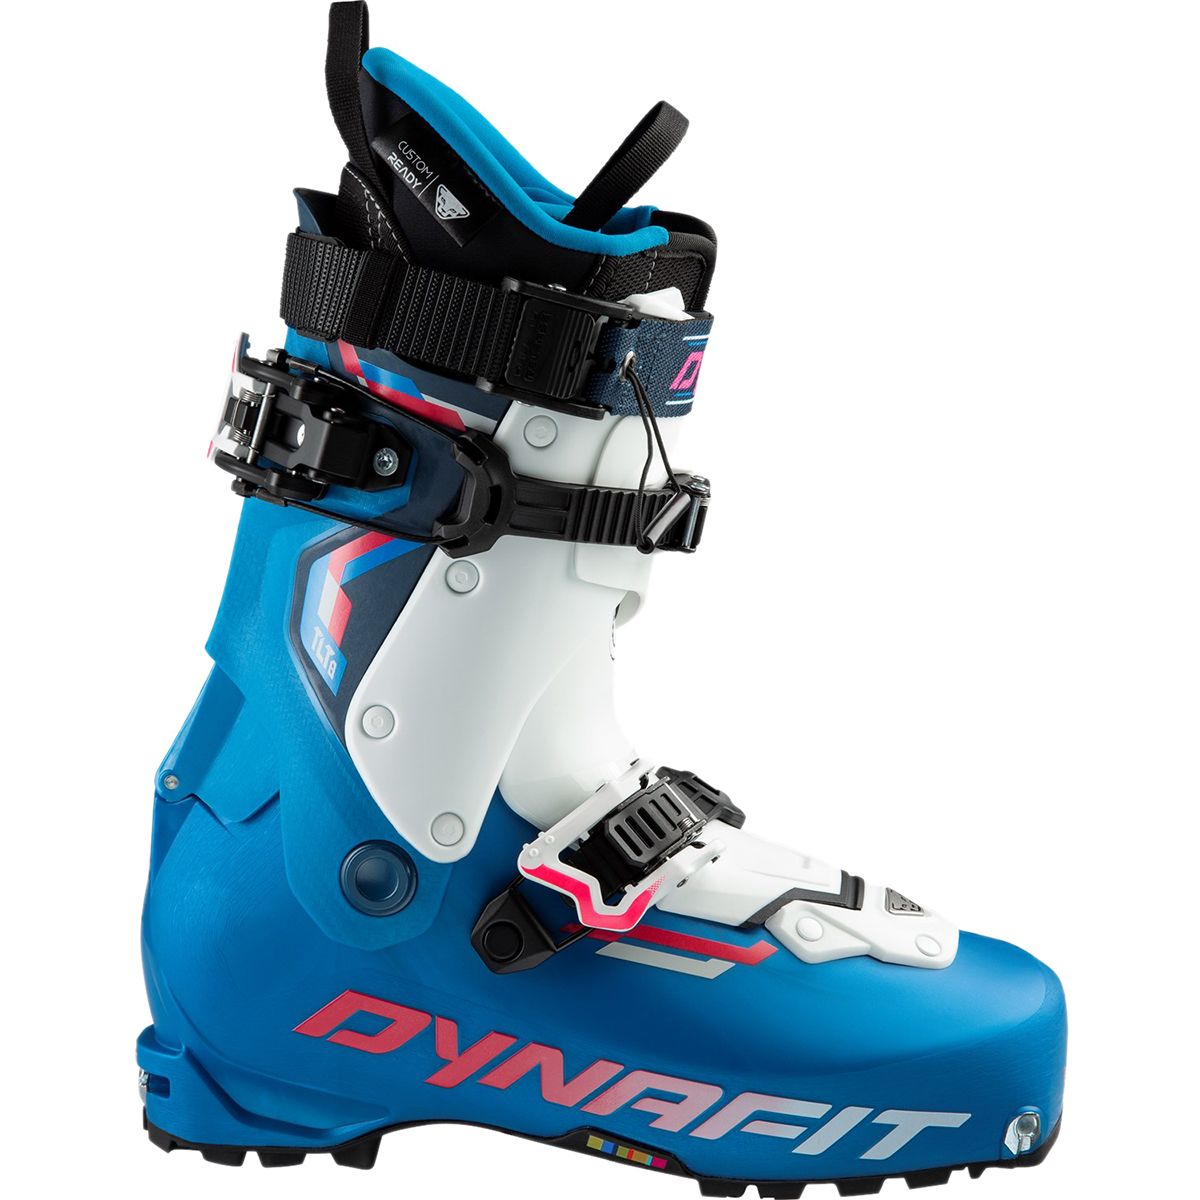 Dynafit TLT8 Expedition CR Alpine Touring Ski Boot - 2022 - Women's